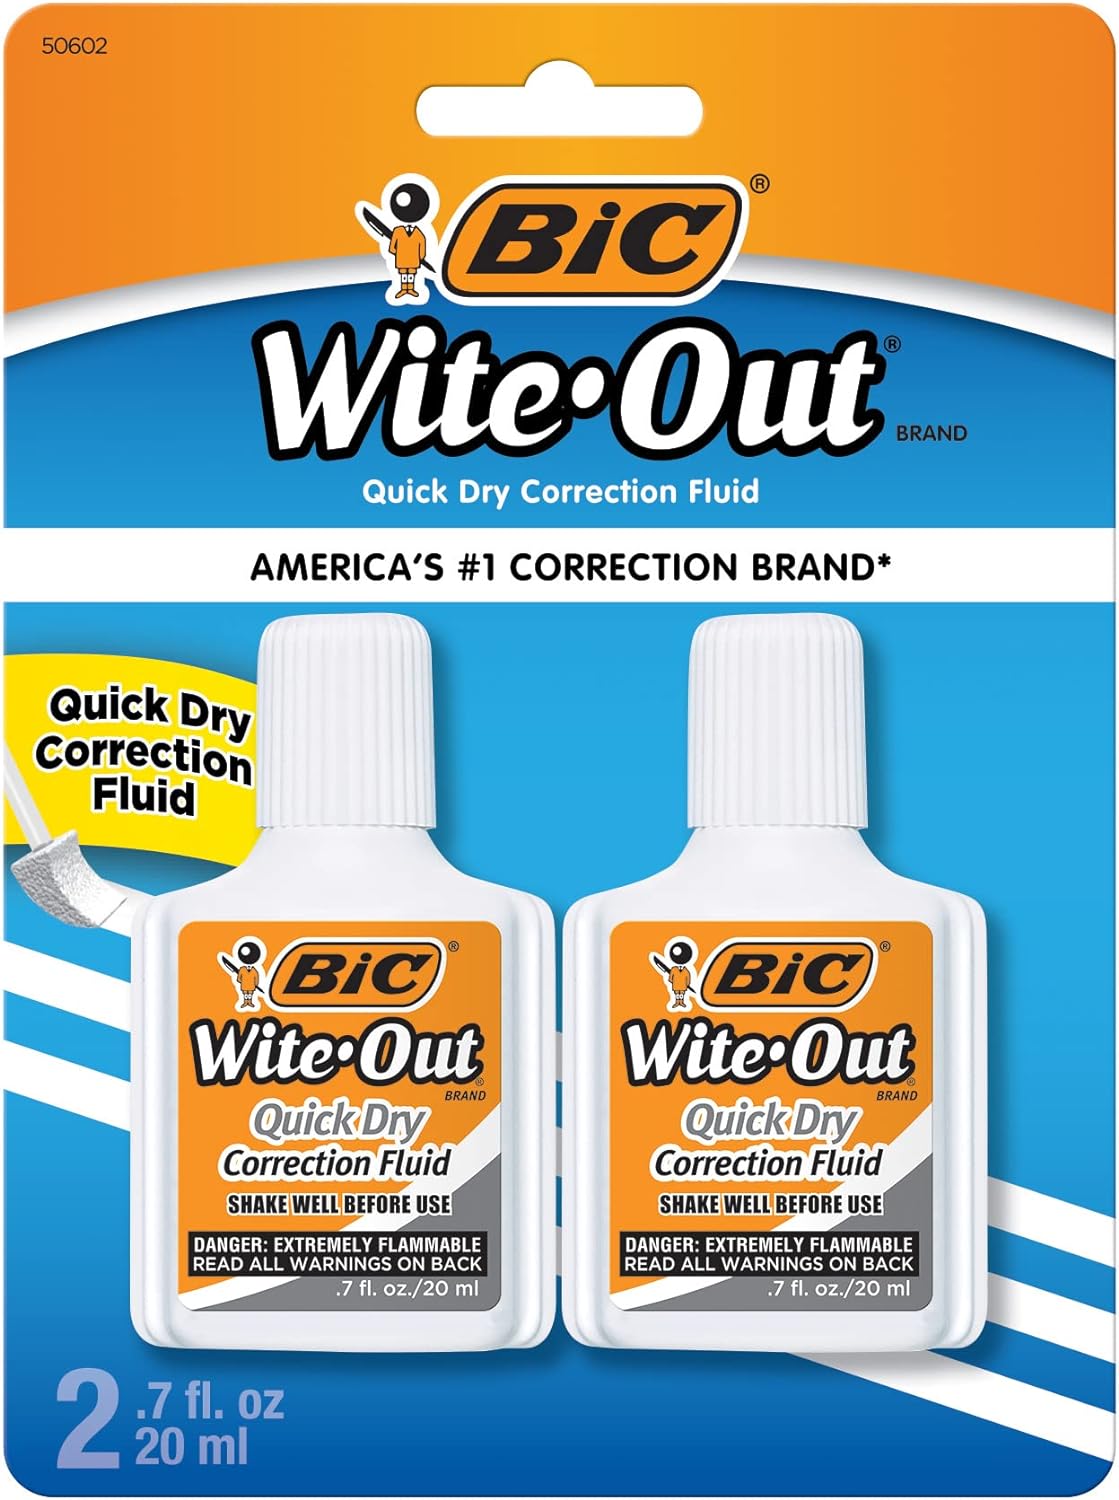 BIC Wite-Out Quick Dry Correction Fluid - 2 pack - white color writeout - white-out